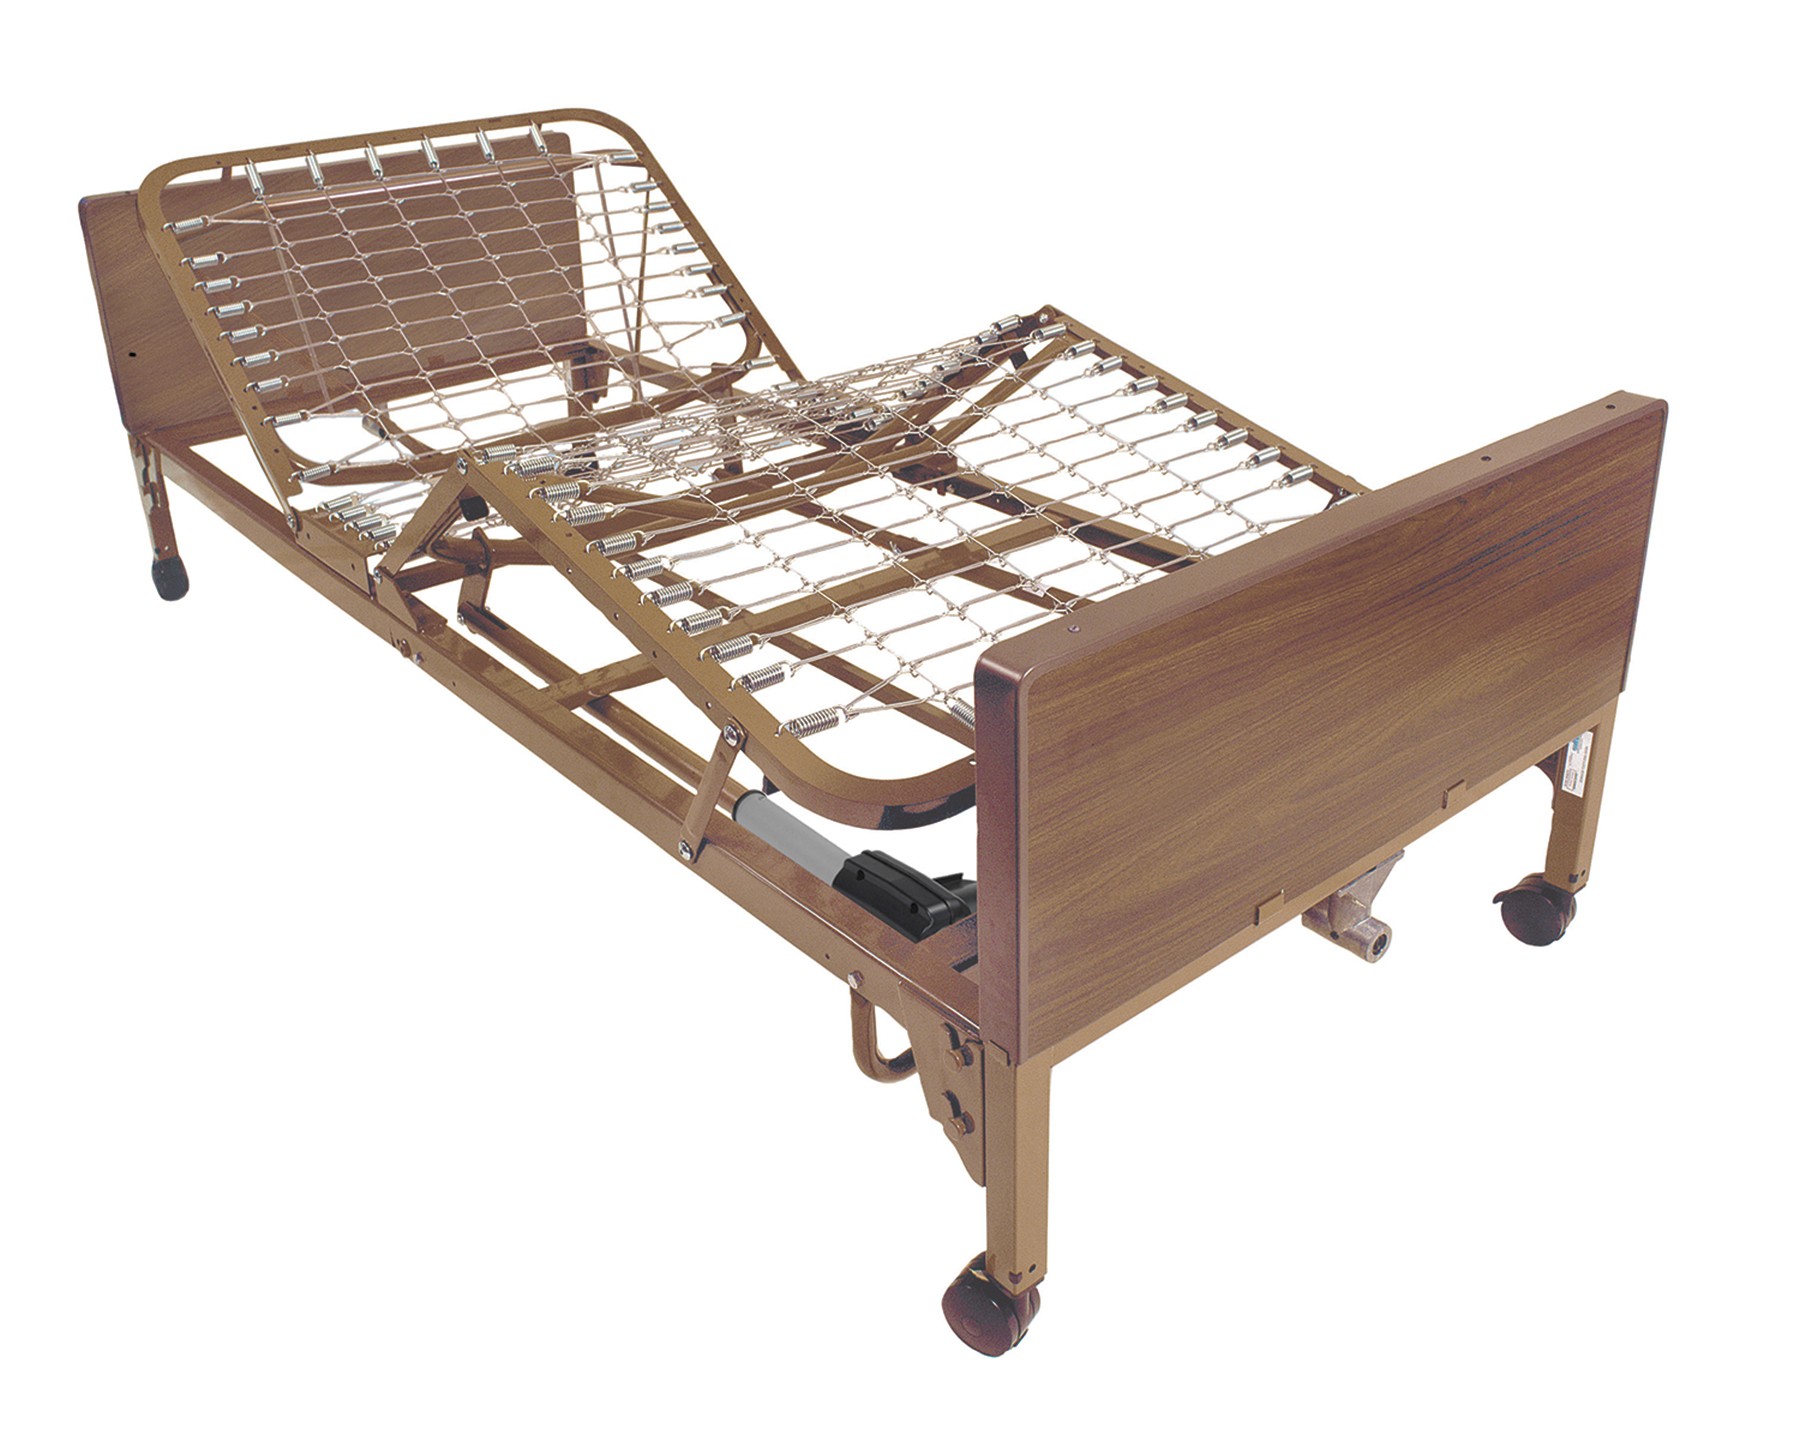 San Jose inexpensive Electric Hospital Beds cheap discount sale price